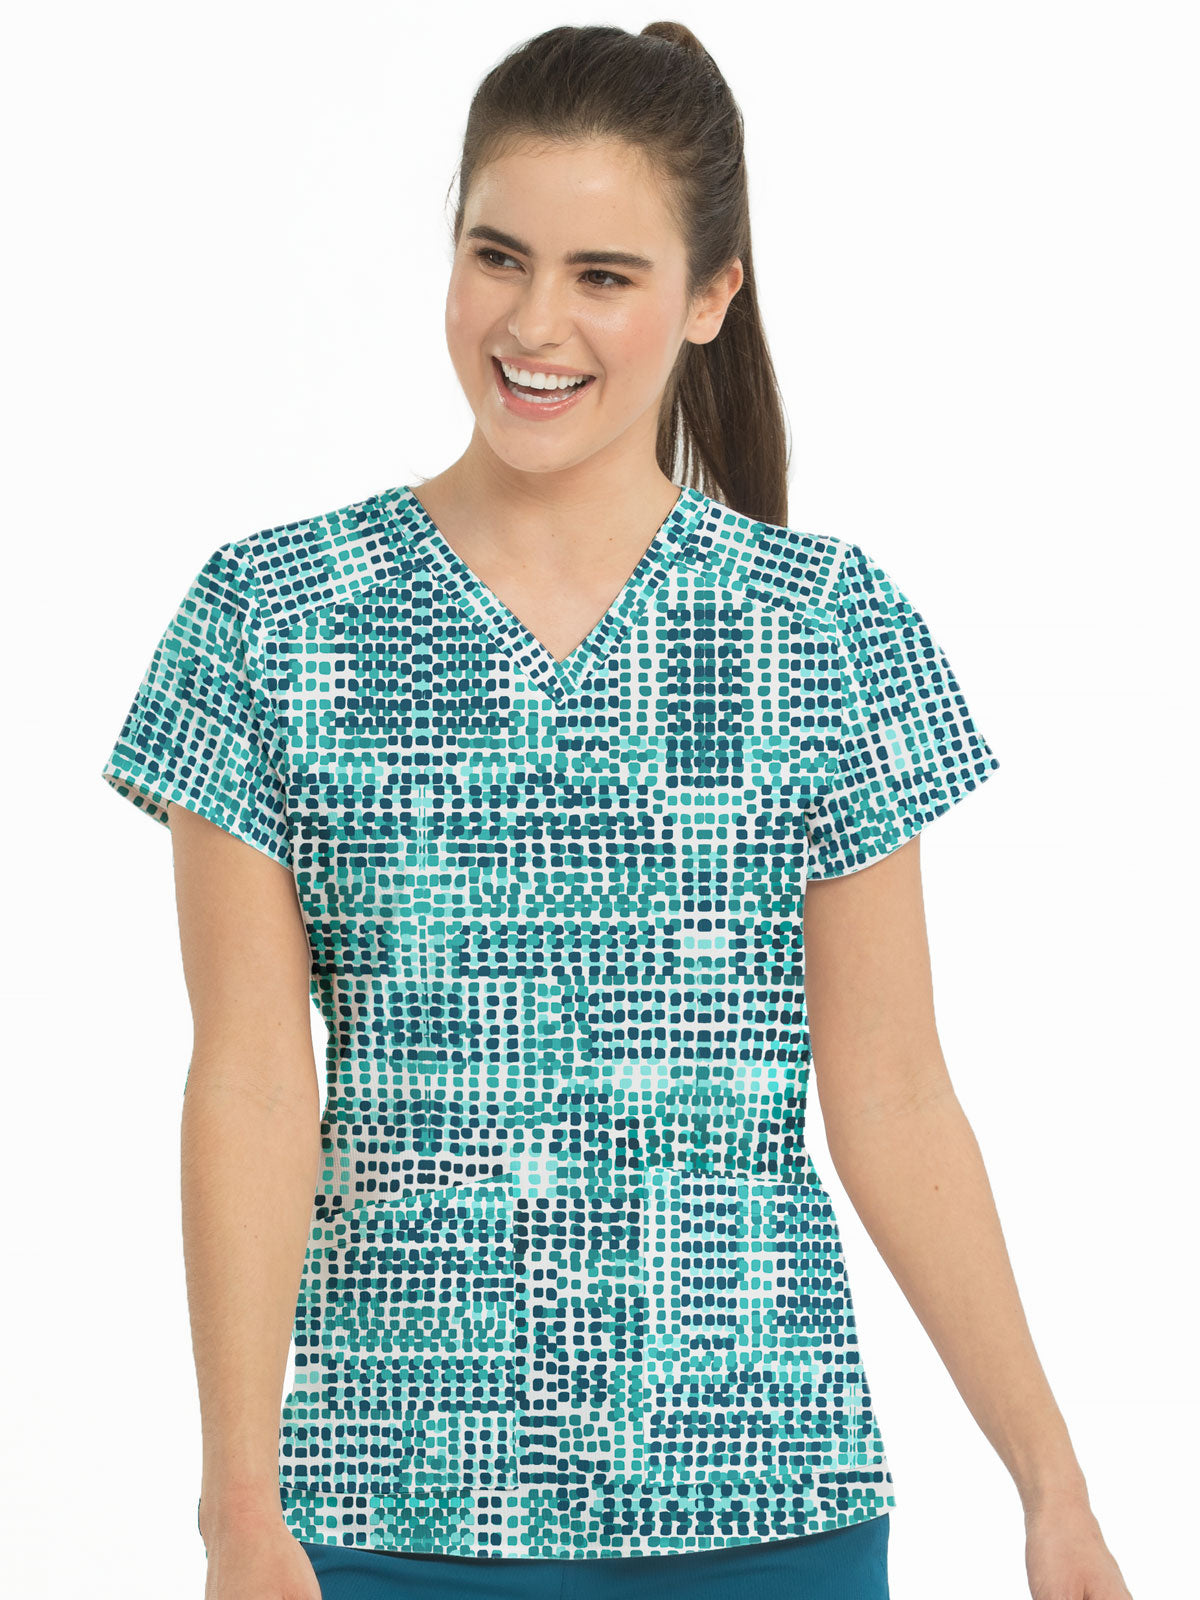 Med Couture Scrub Top Print Plus Sizes Squared Fantasy - Parker's Clothing & Gifts